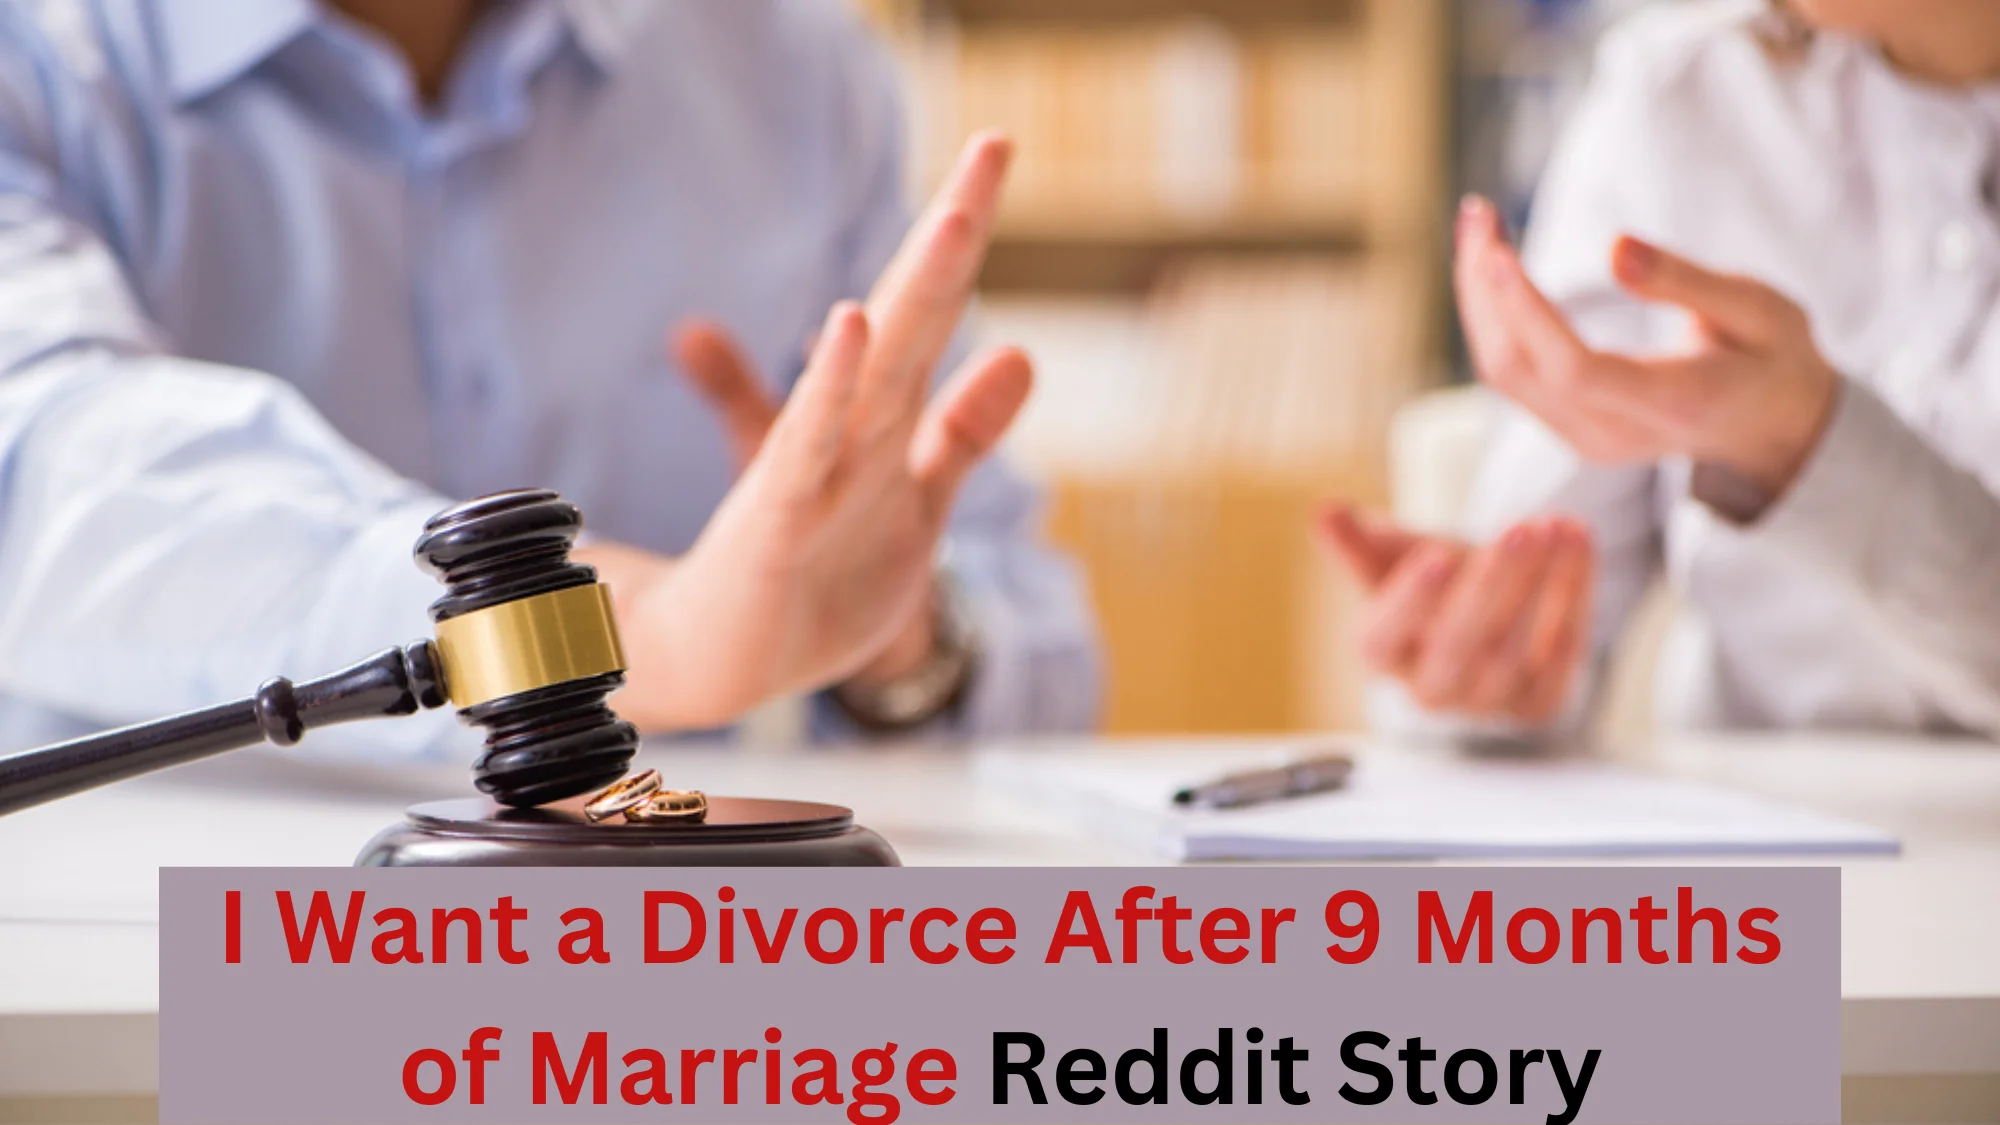 I Want a Divorce After 9 Months of Marriage Reddit Story